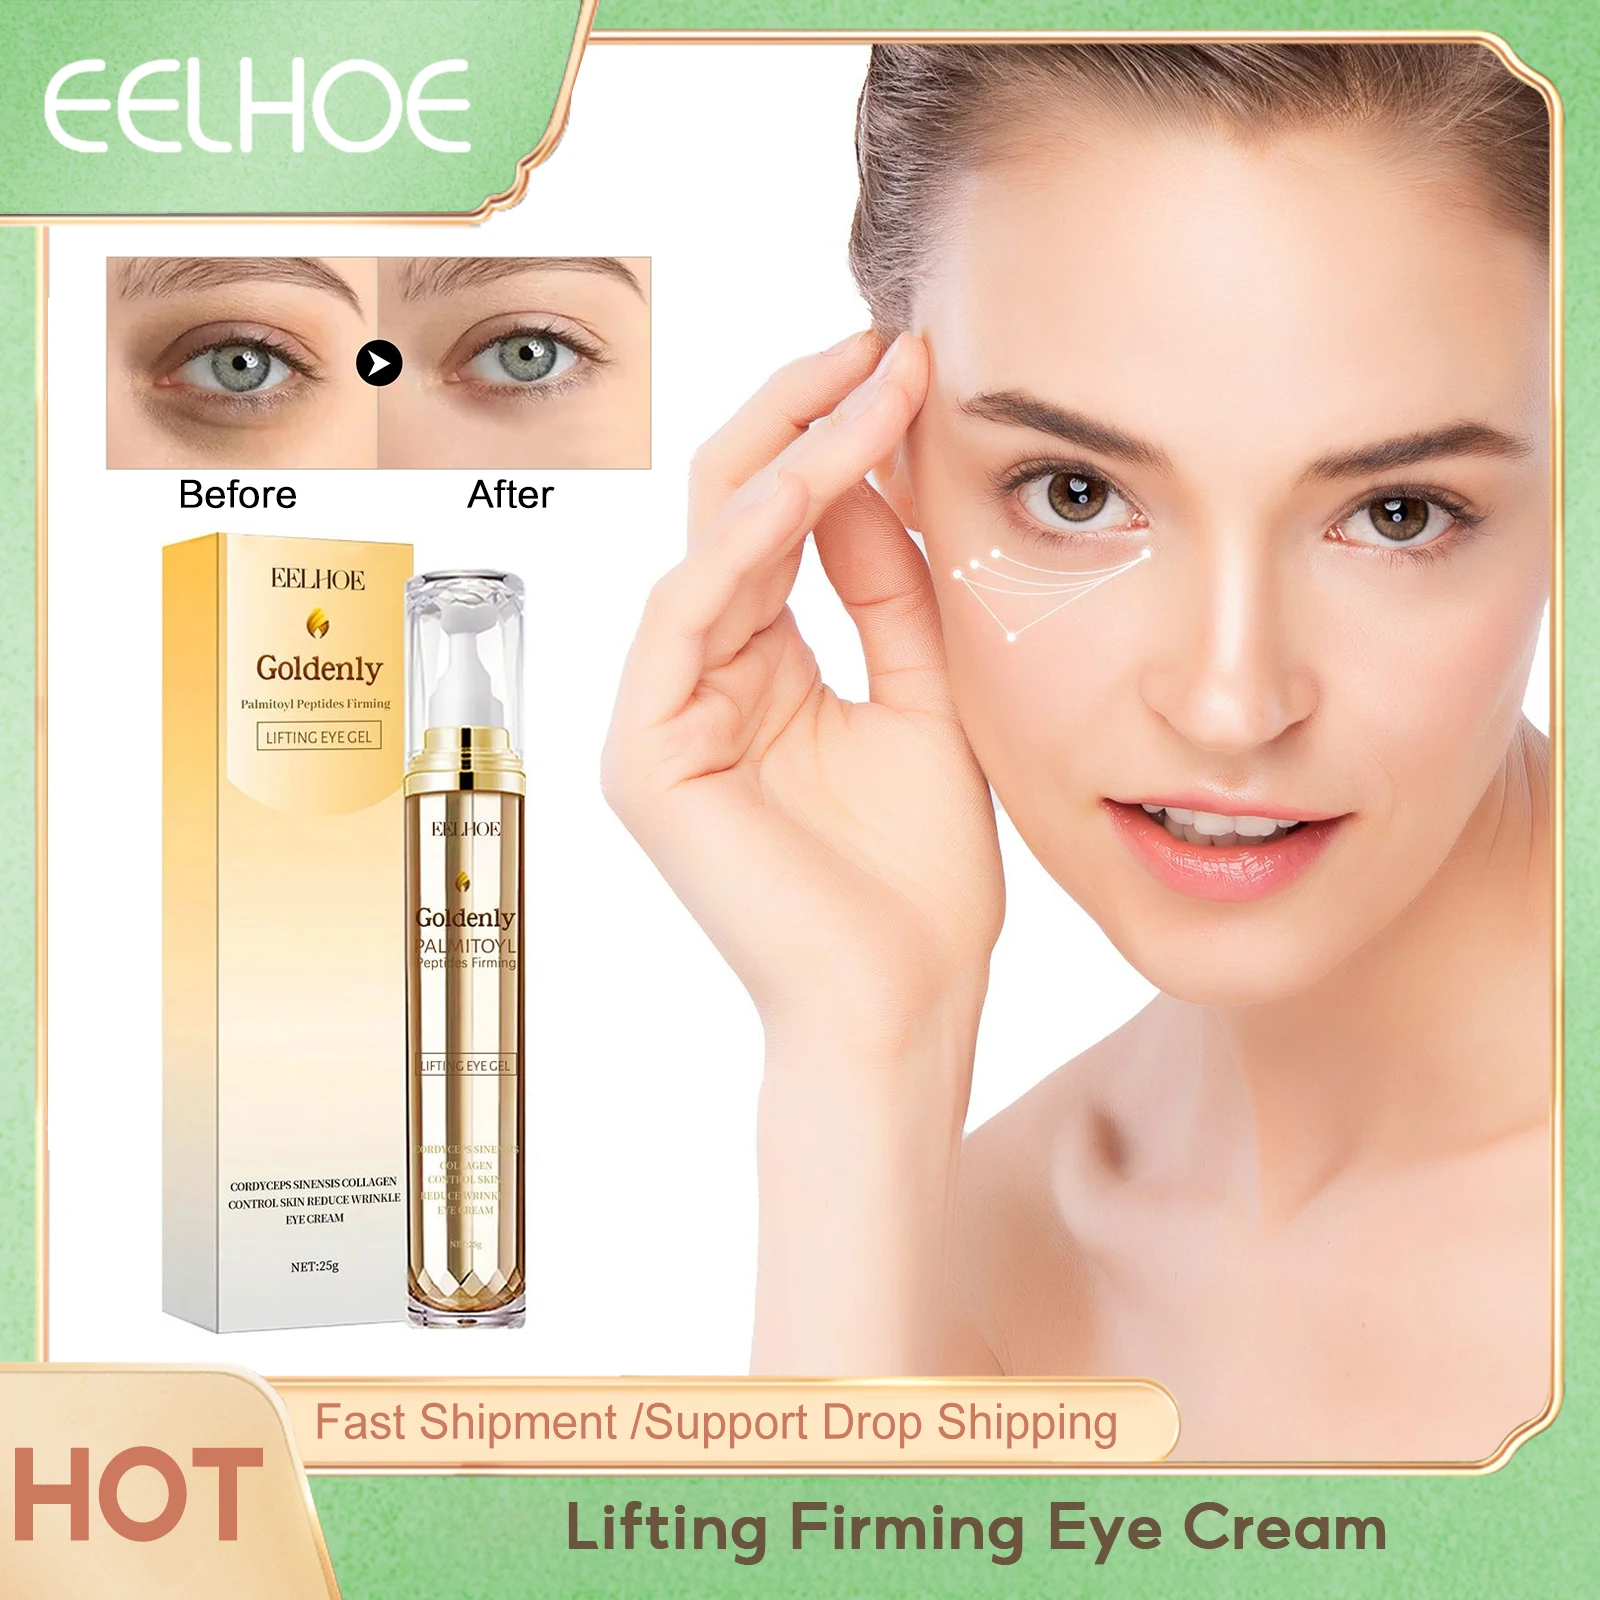 Lifting Firming Eye Cream Improve Eye Bags Remove Fat Granule Diminish Fine Lines Moisturizing Smooth Skin Anti Aging Eye Cream electric remove sweater pilling machine portable clothes fabric shaver hair ball trimmer lint fuzz shaver fluff wool granule